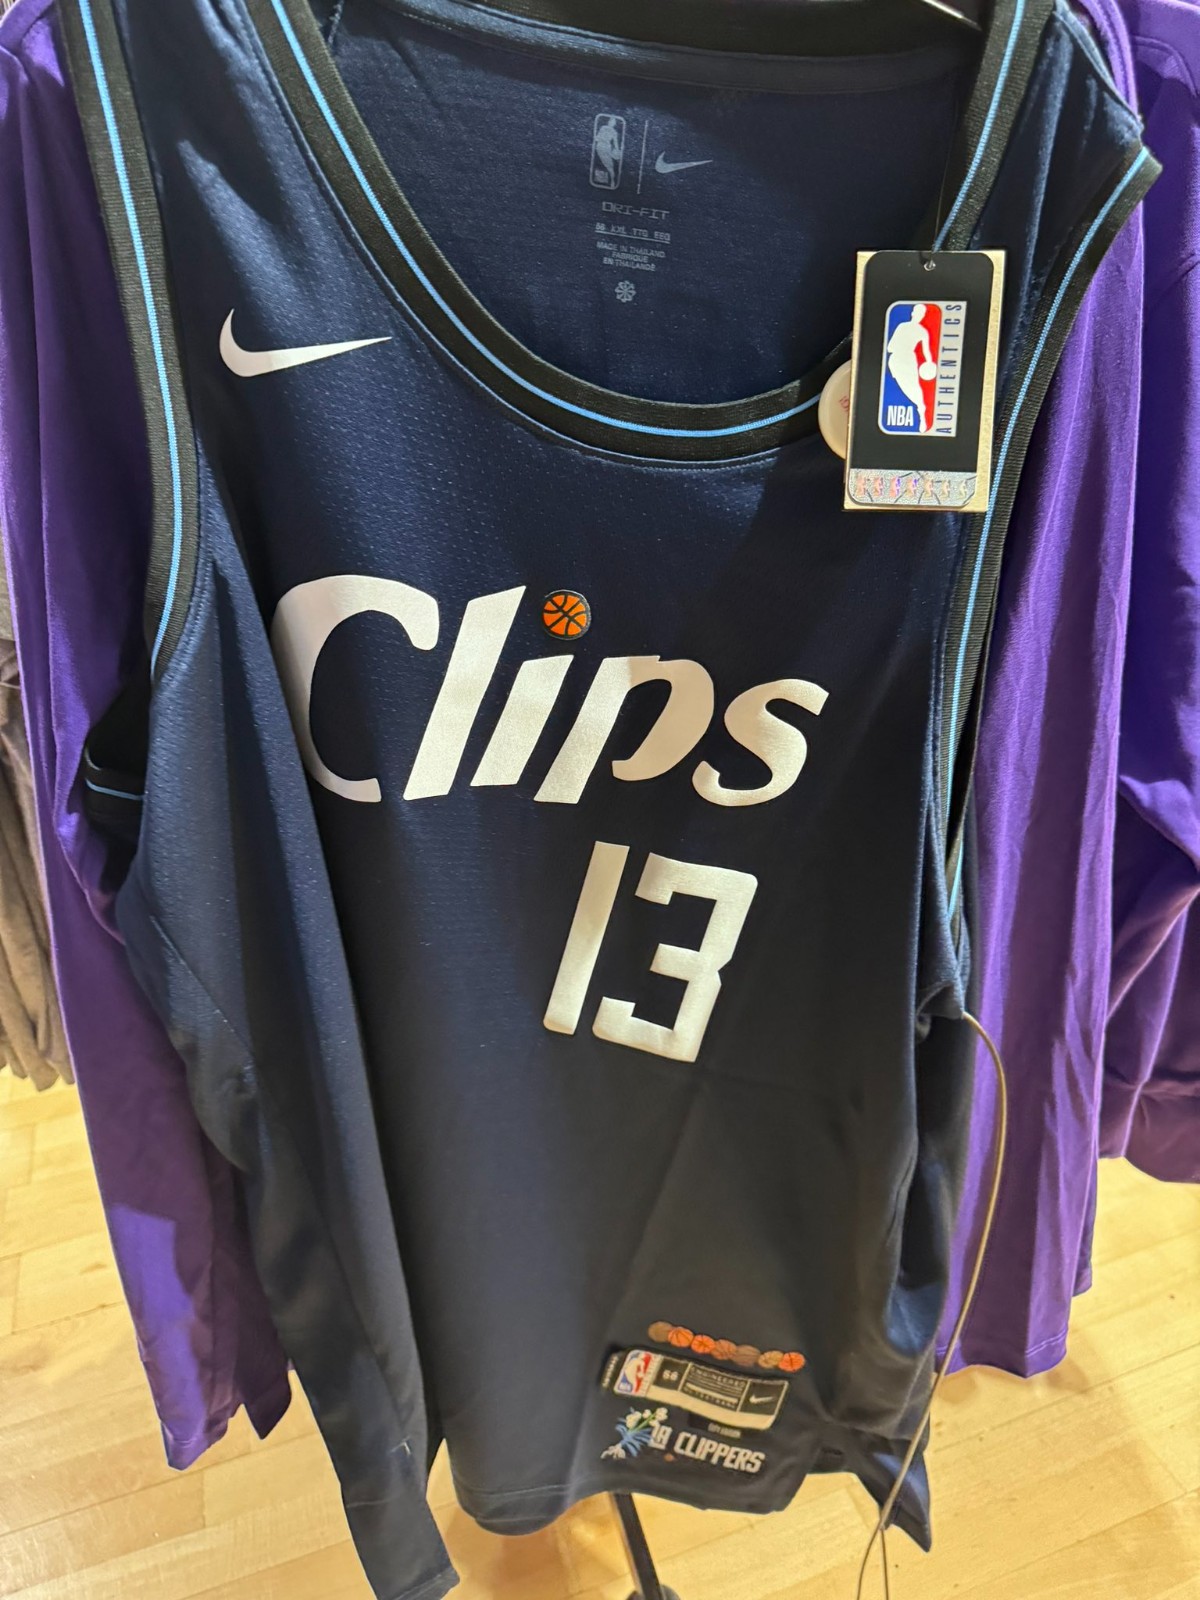 Los Angeles Clippers 2023-24 'City Edition' uniforms have been leaked. 🔥  or 🗑?